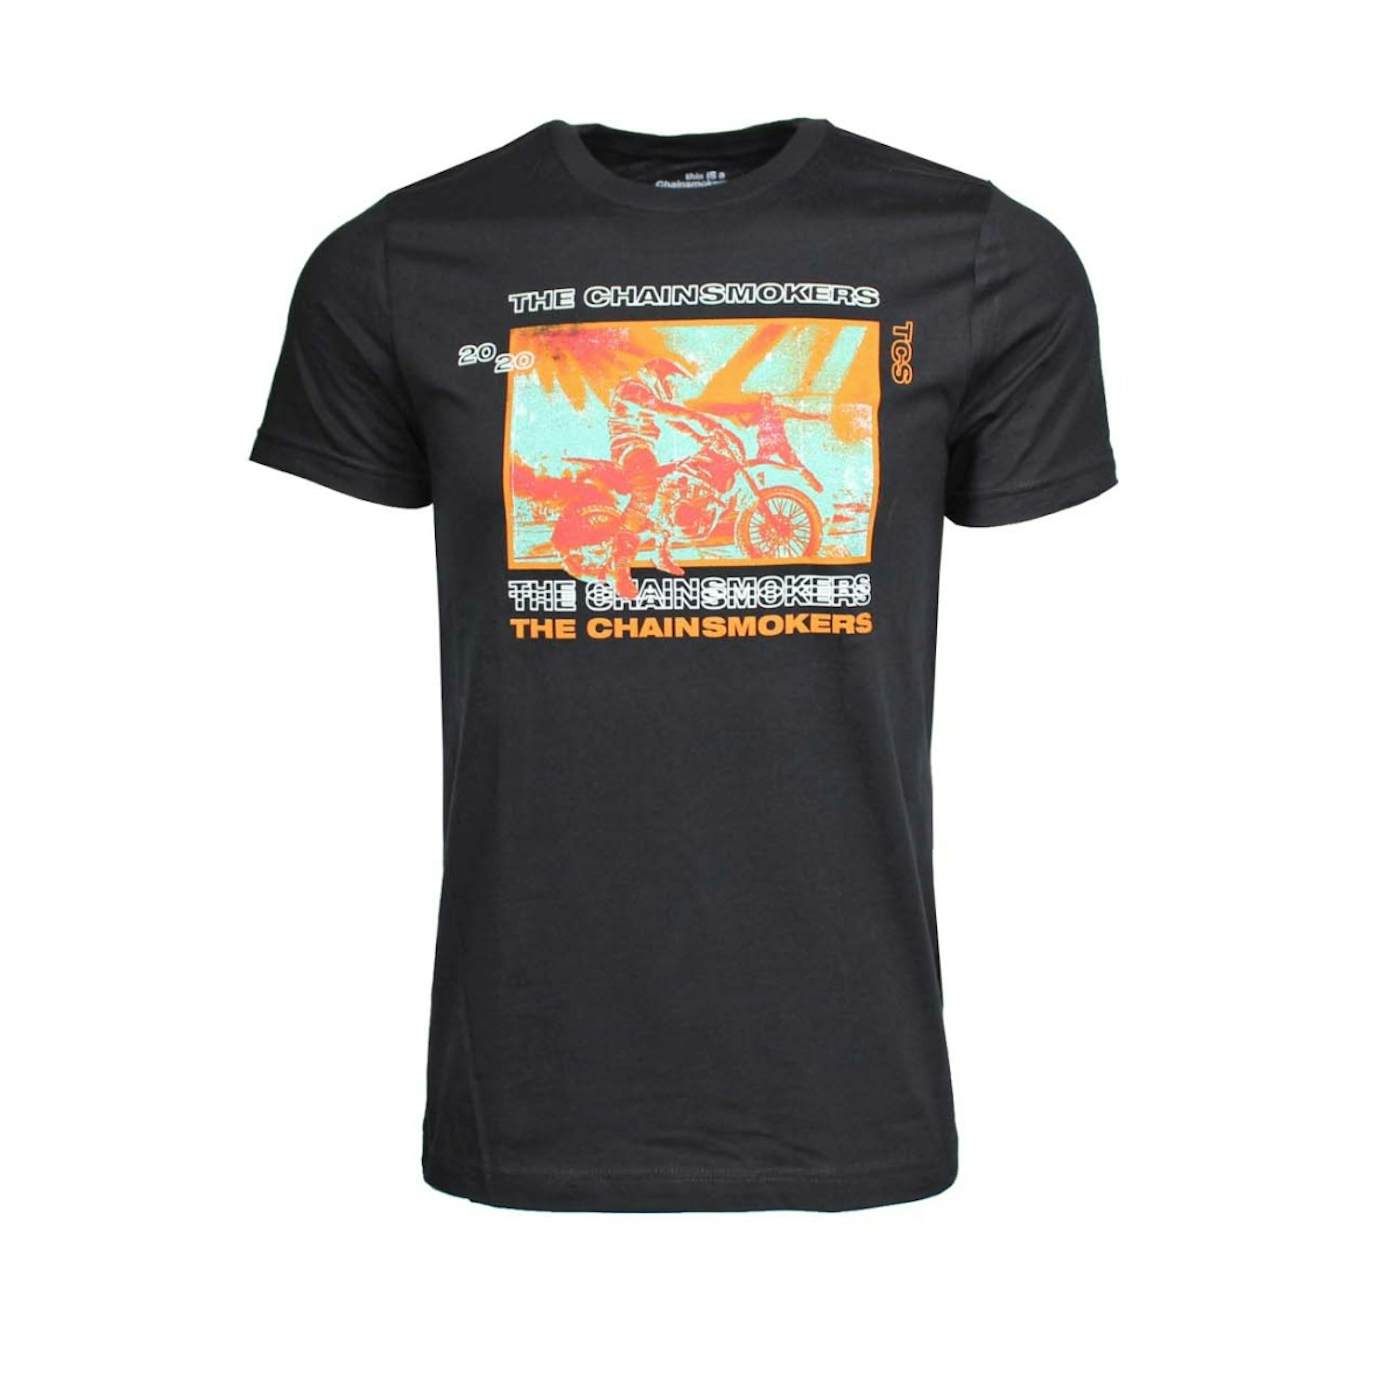 The Chainsmokers T Shirt | Chainsmokers Motorcycle T-Shirt